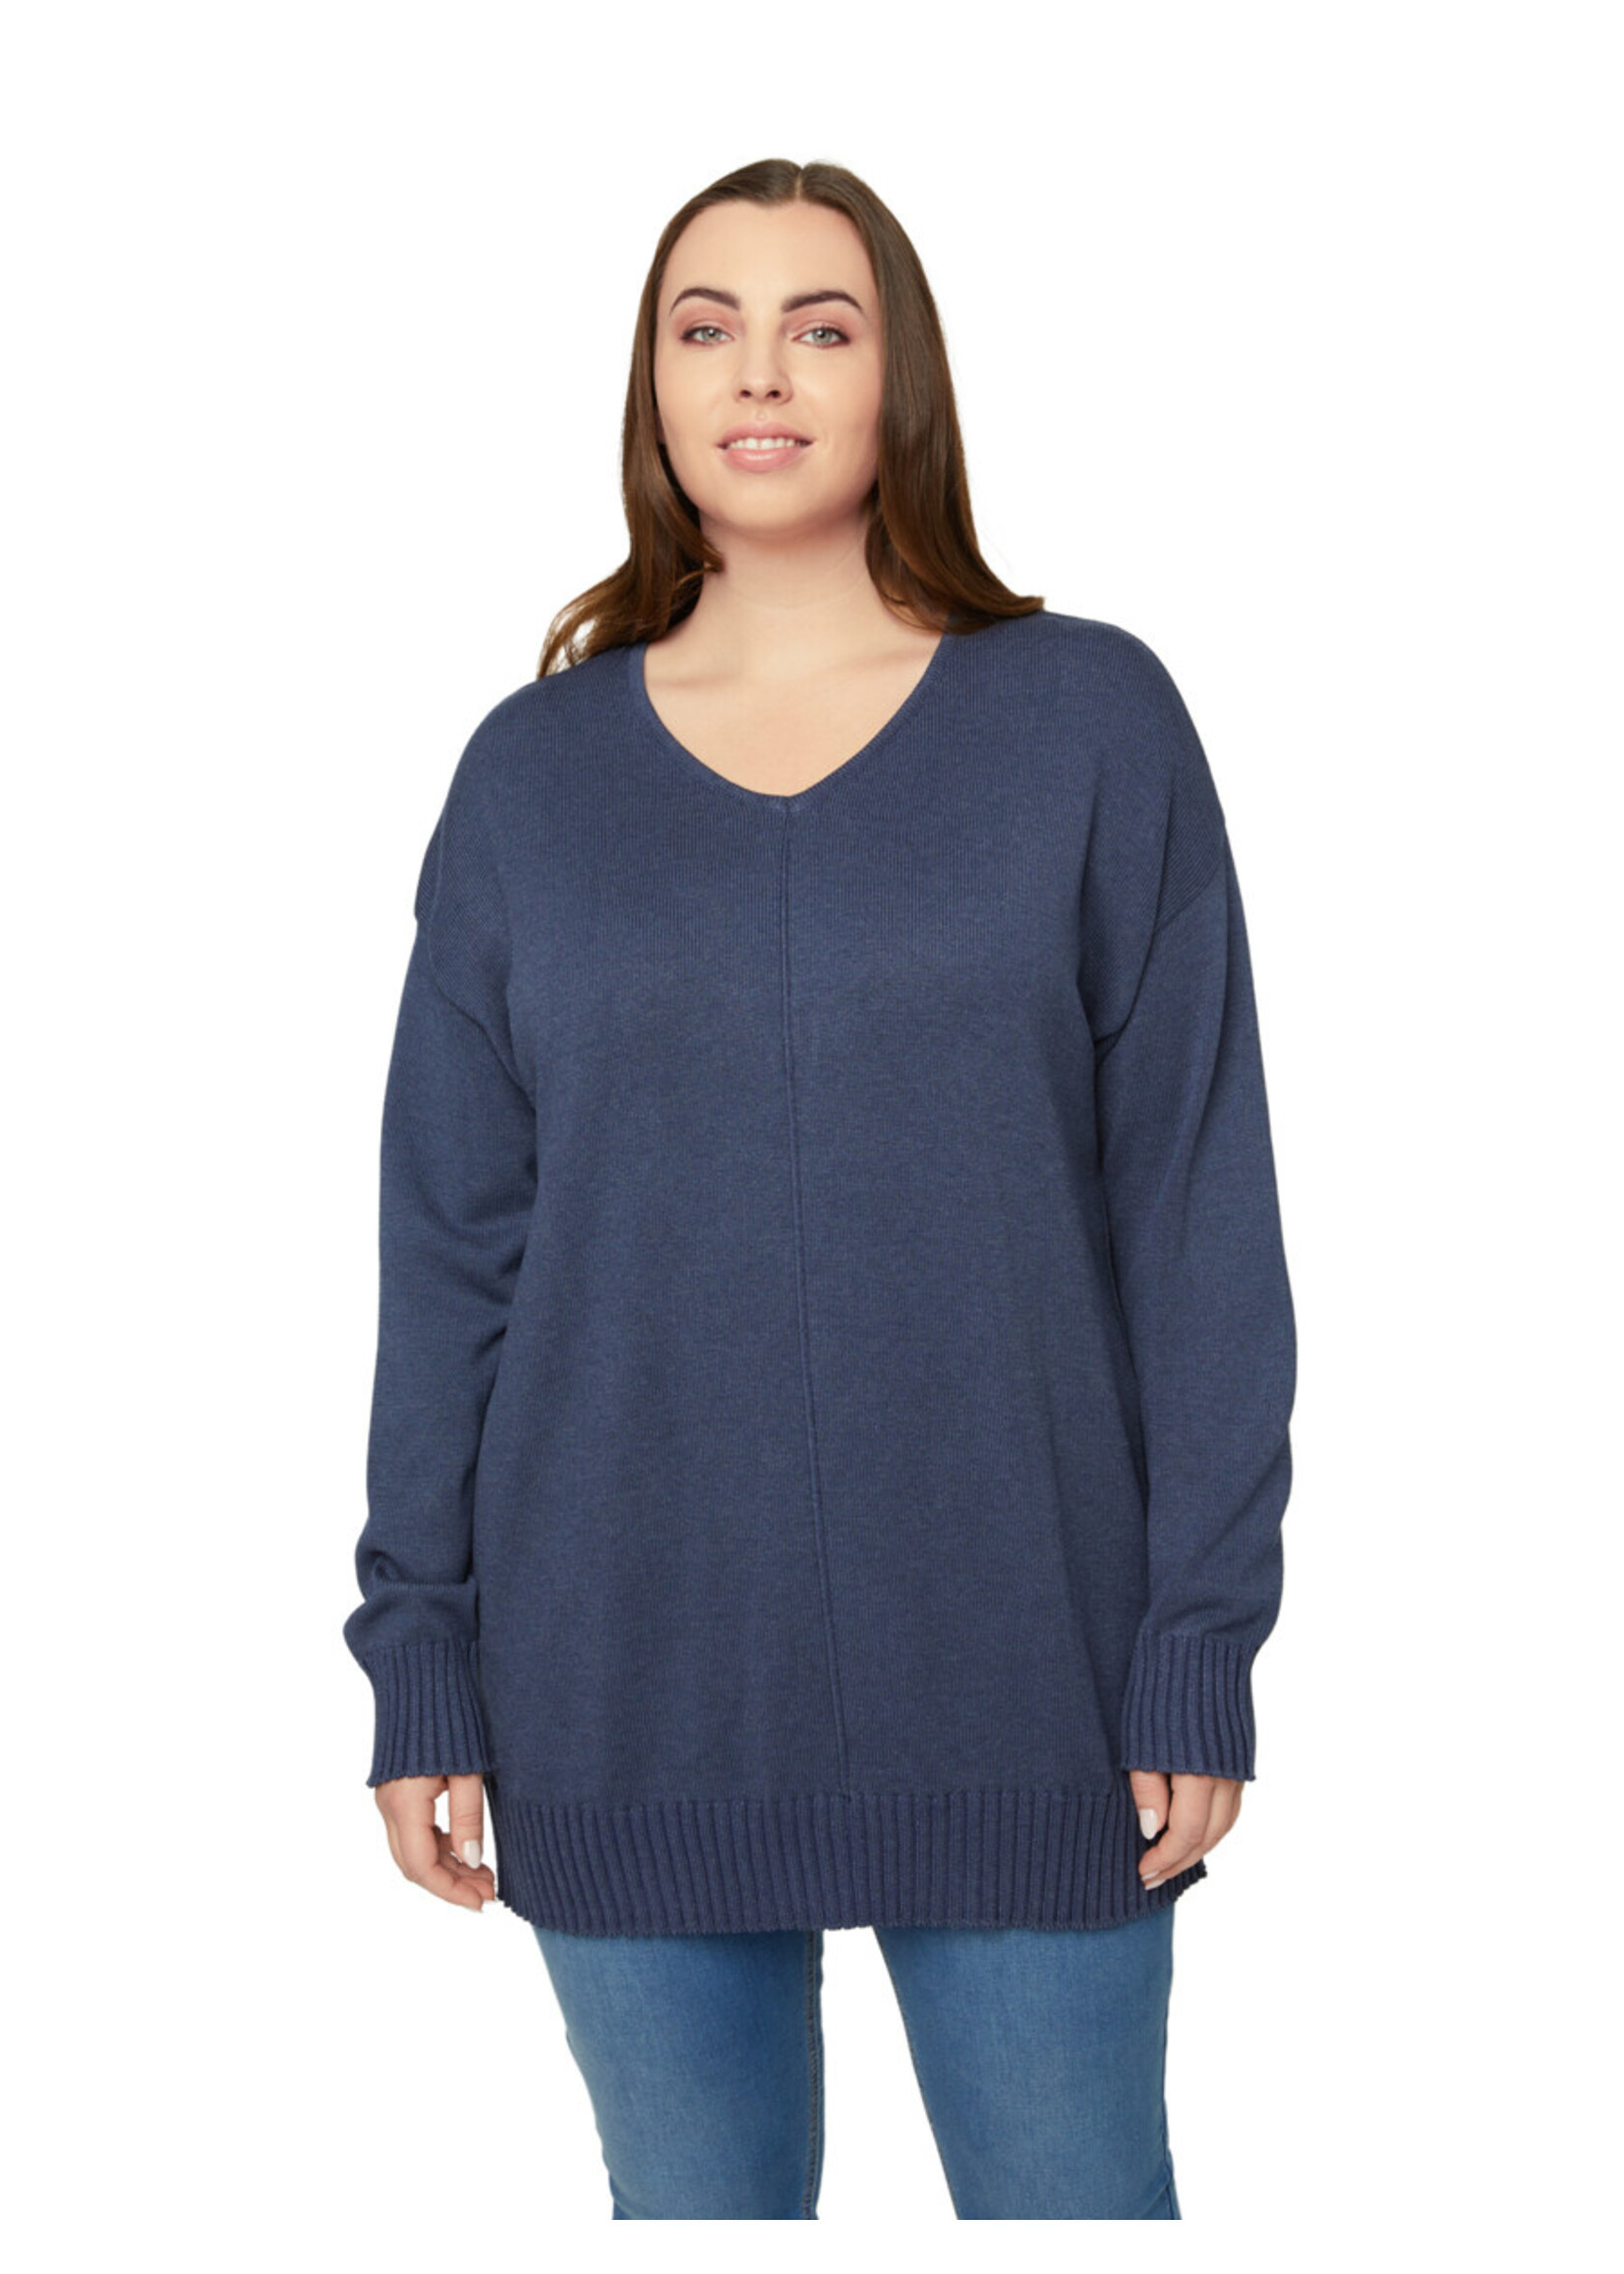 Ciso Lange pullover Naval